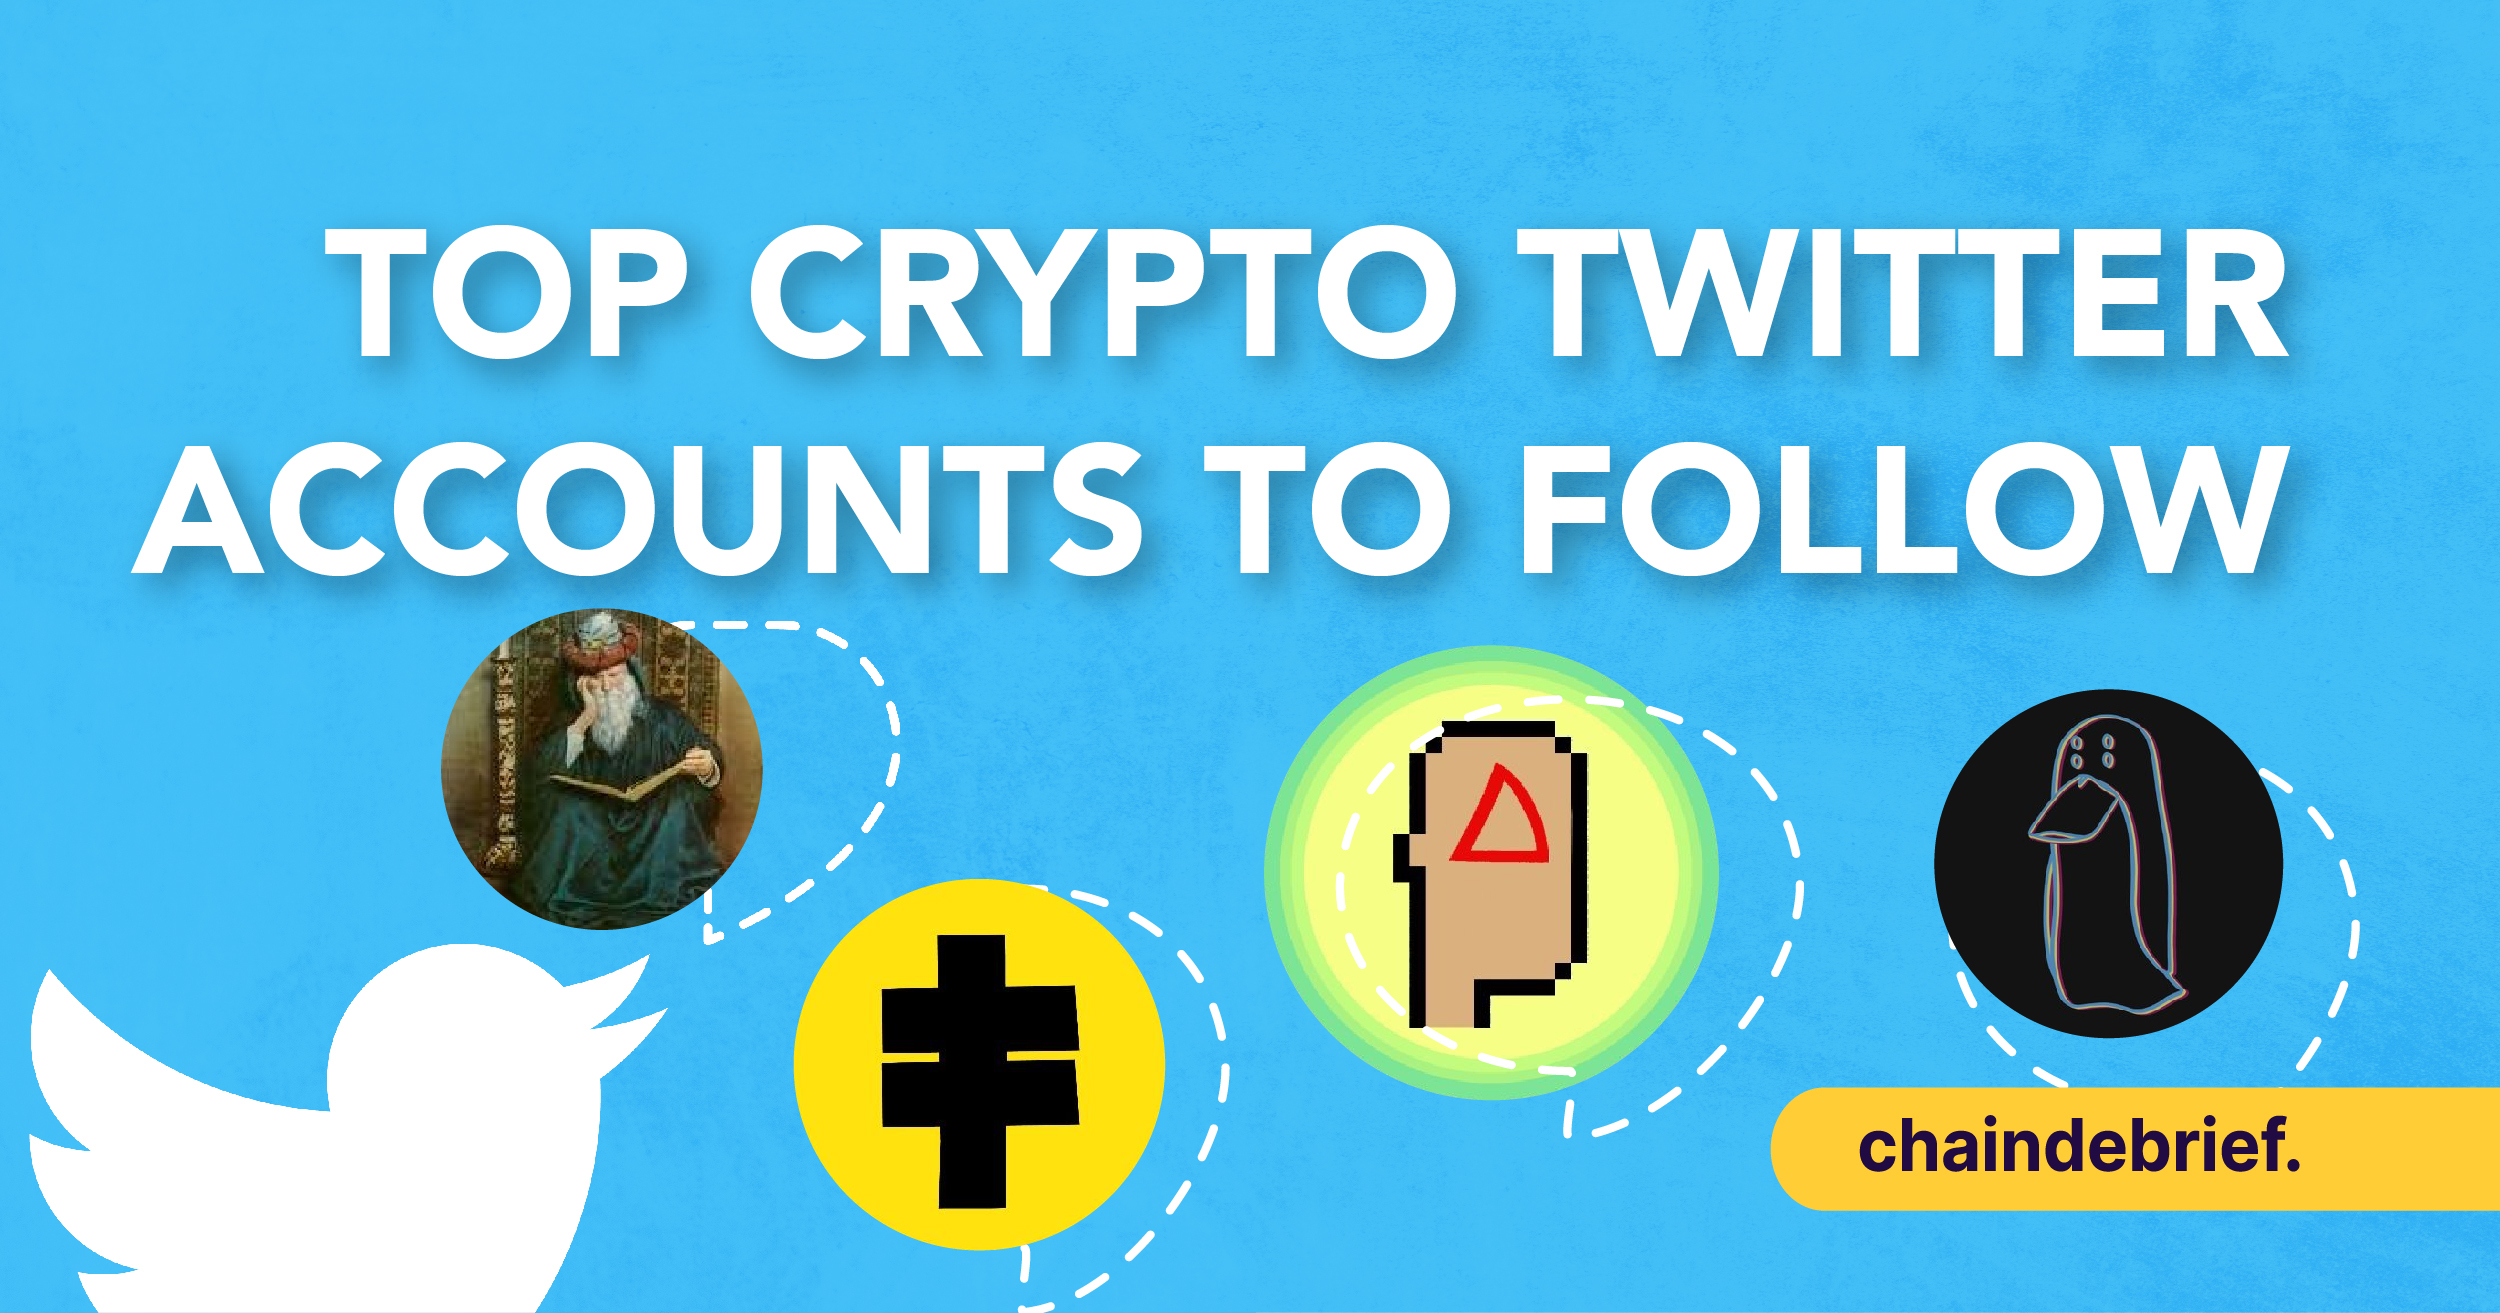 Avoid Pump And Dump Schemes: Top 4 Twitter Accounts To Follow For Quality Alphas